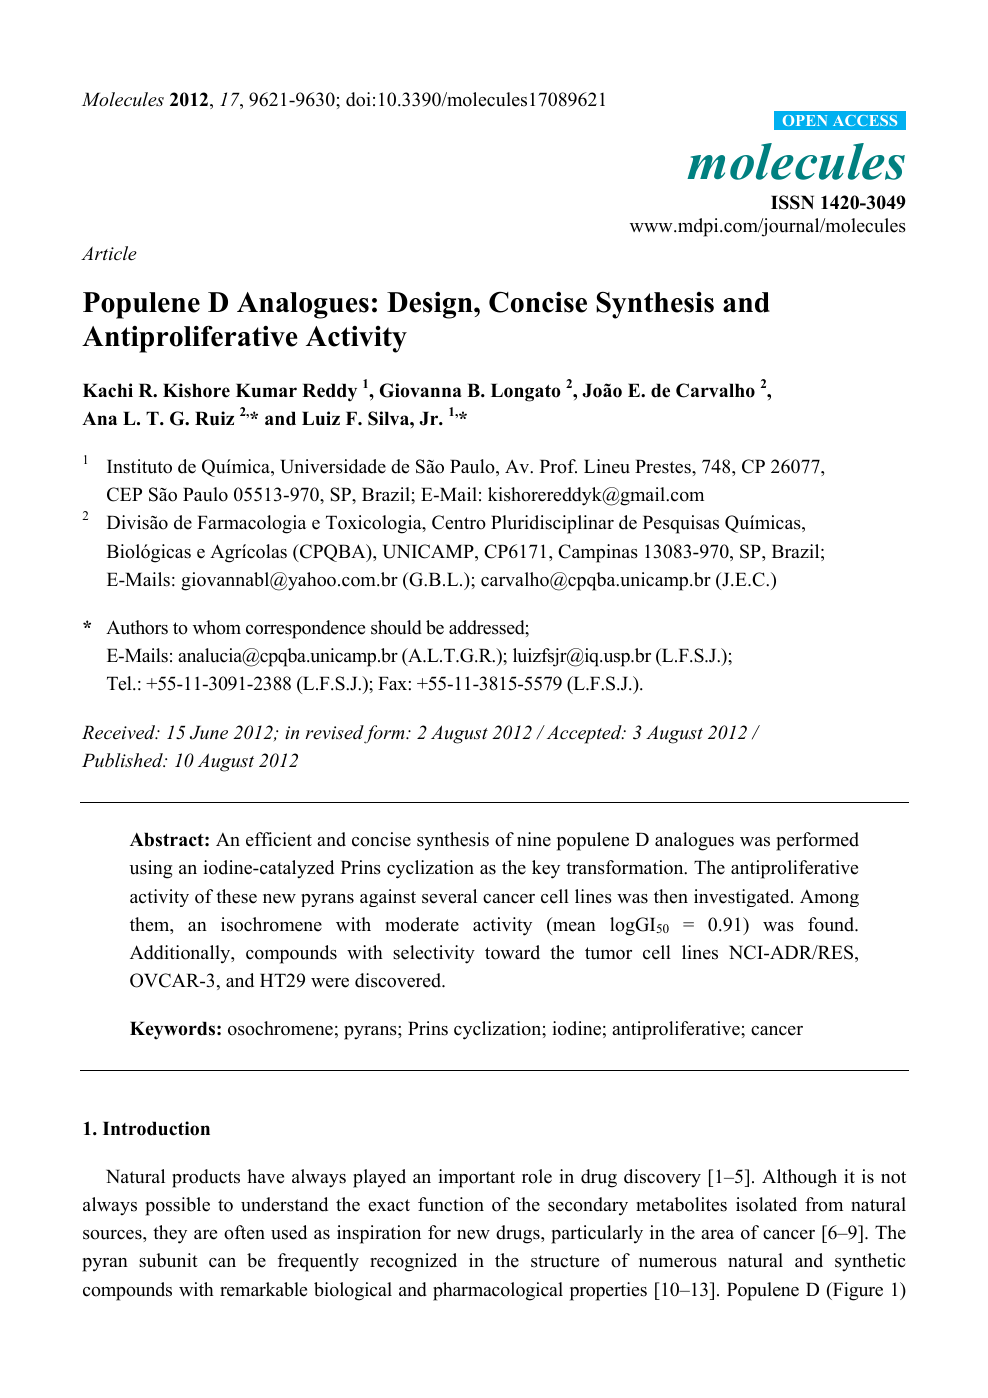 Populene D Analogues Design Concise Synthesis And Antiproliferative Activity Topic Of Research Paper In Chemical Sciences Download Scholarly Article Pdf And Read For Free On Cyberleninka Open Science Hub